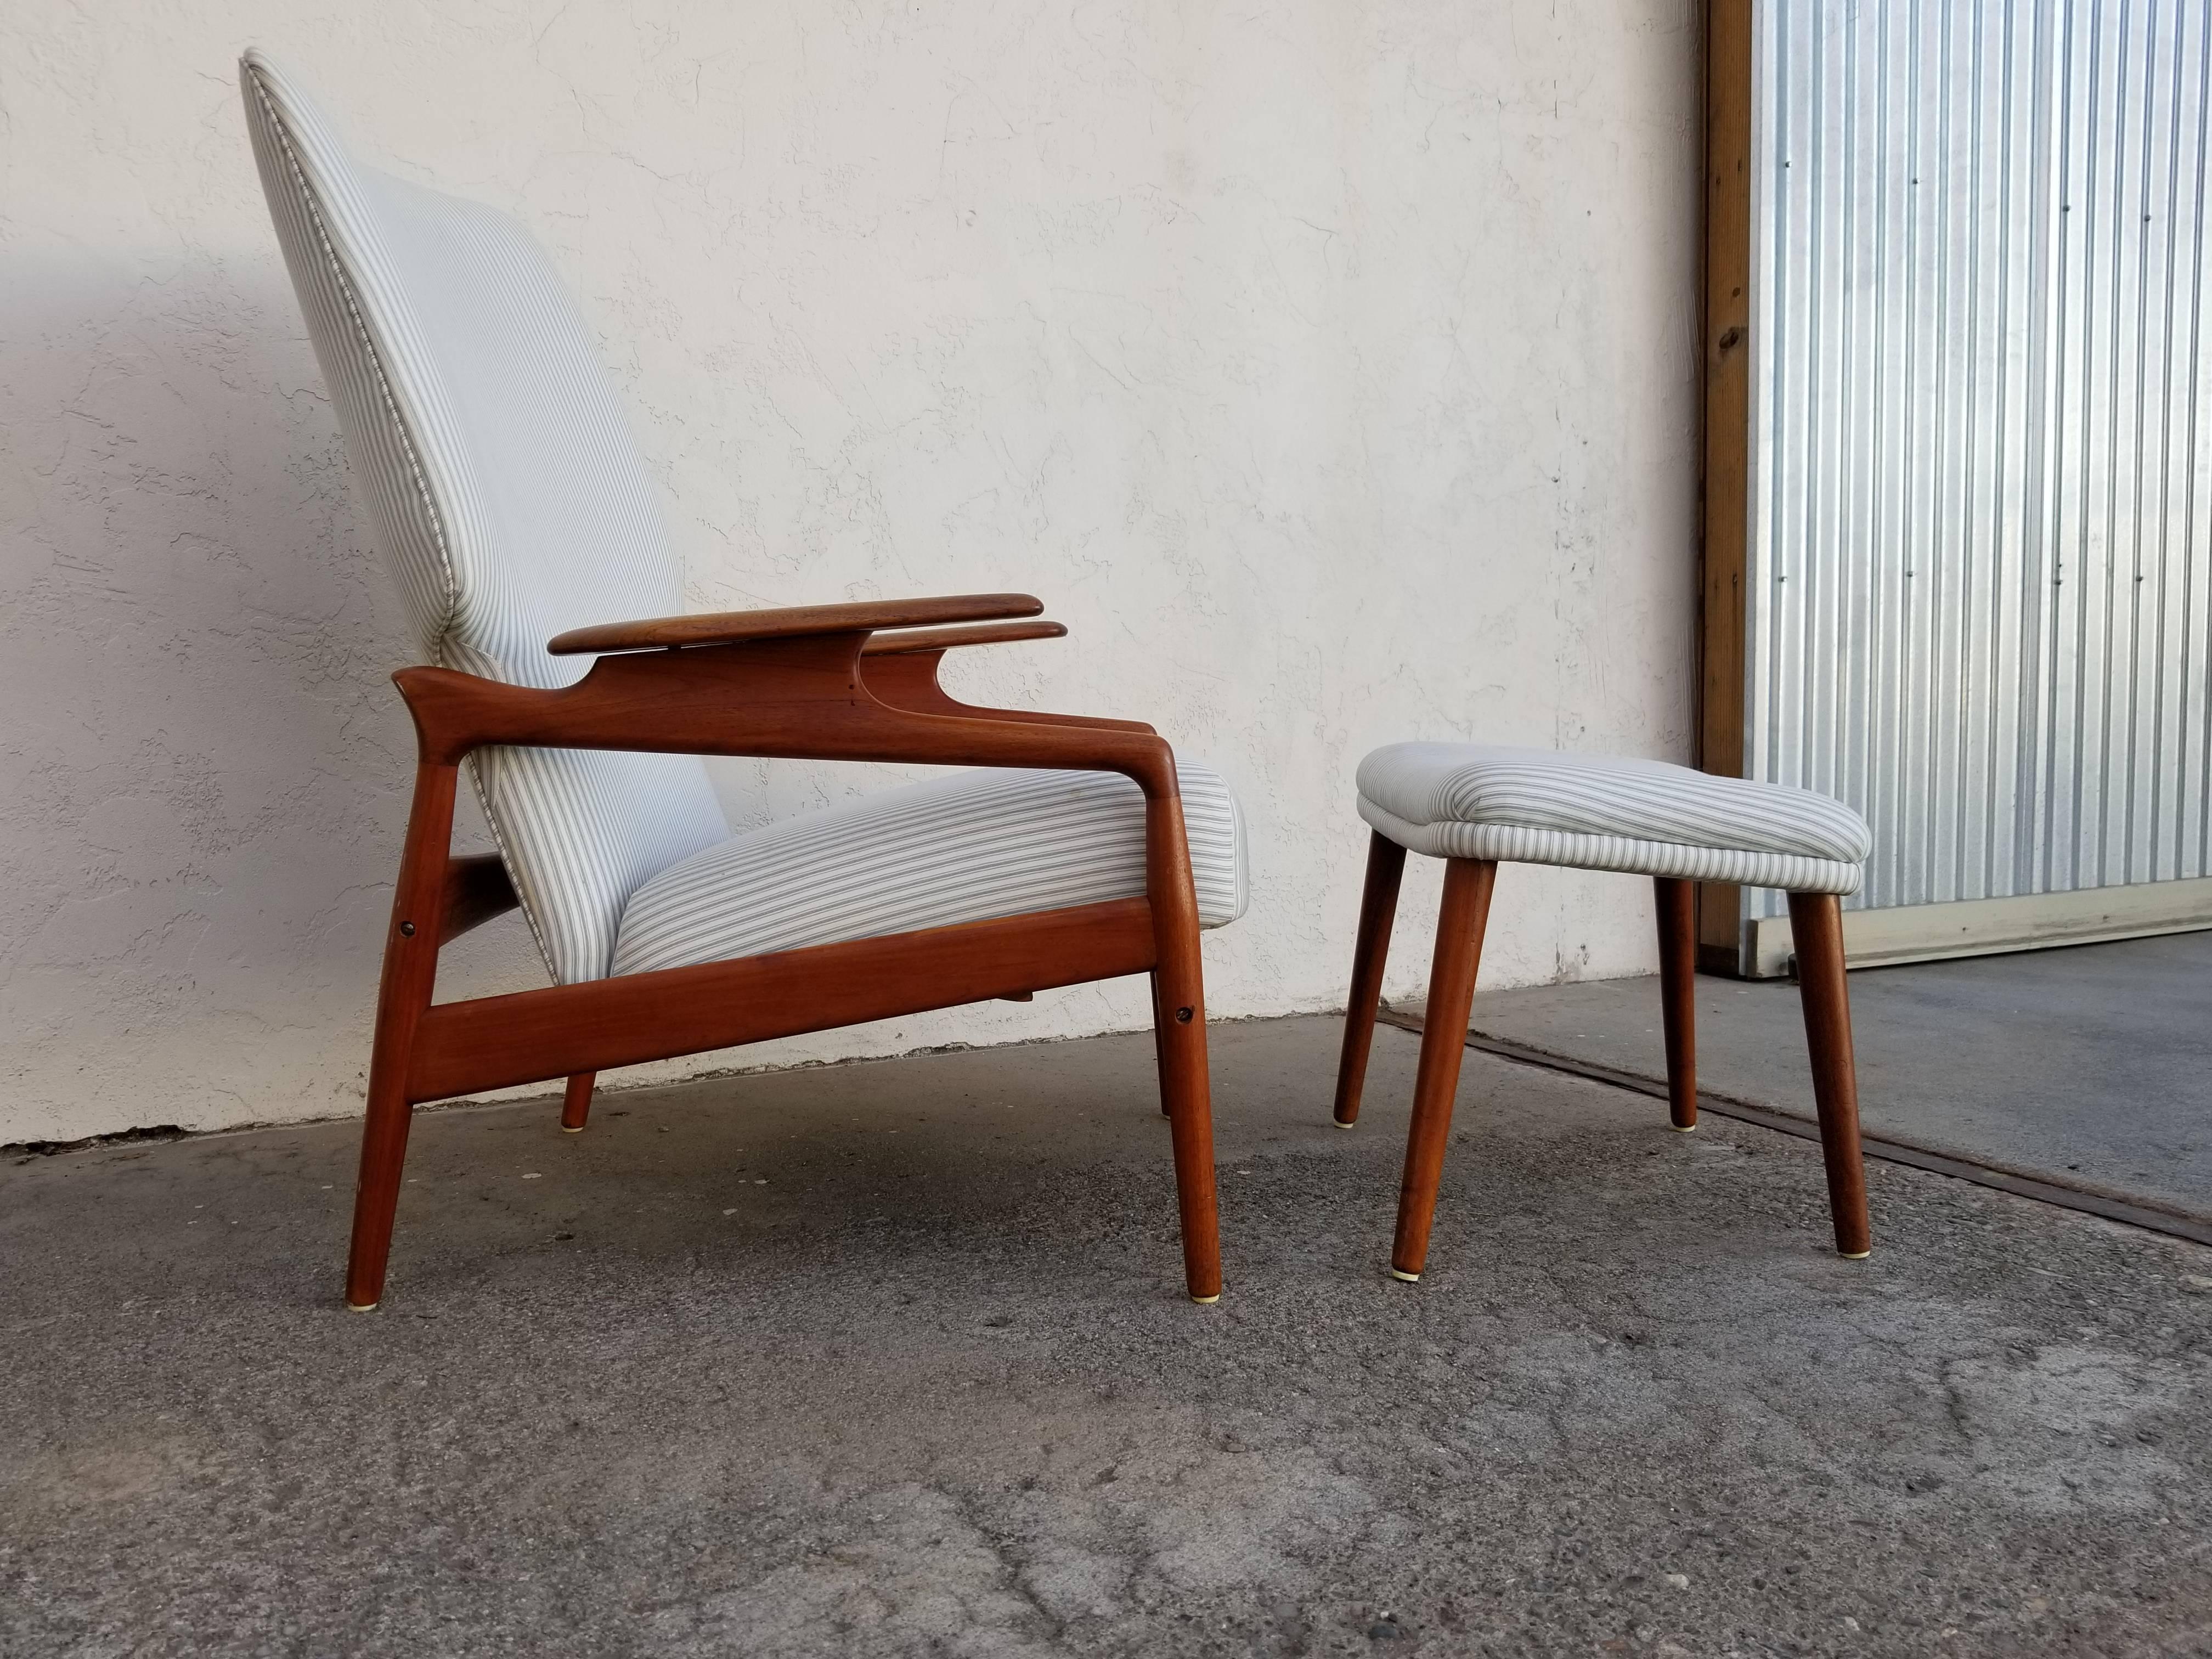 A Danish Modern teak lounge chair and ottoman in the manner of Finn Juhl. Adjustable or reclining seat option with two positions. Comfort with beautiful sculptural design. Nice glow and patina to finish. Made in Denmark. Replacing upholstery